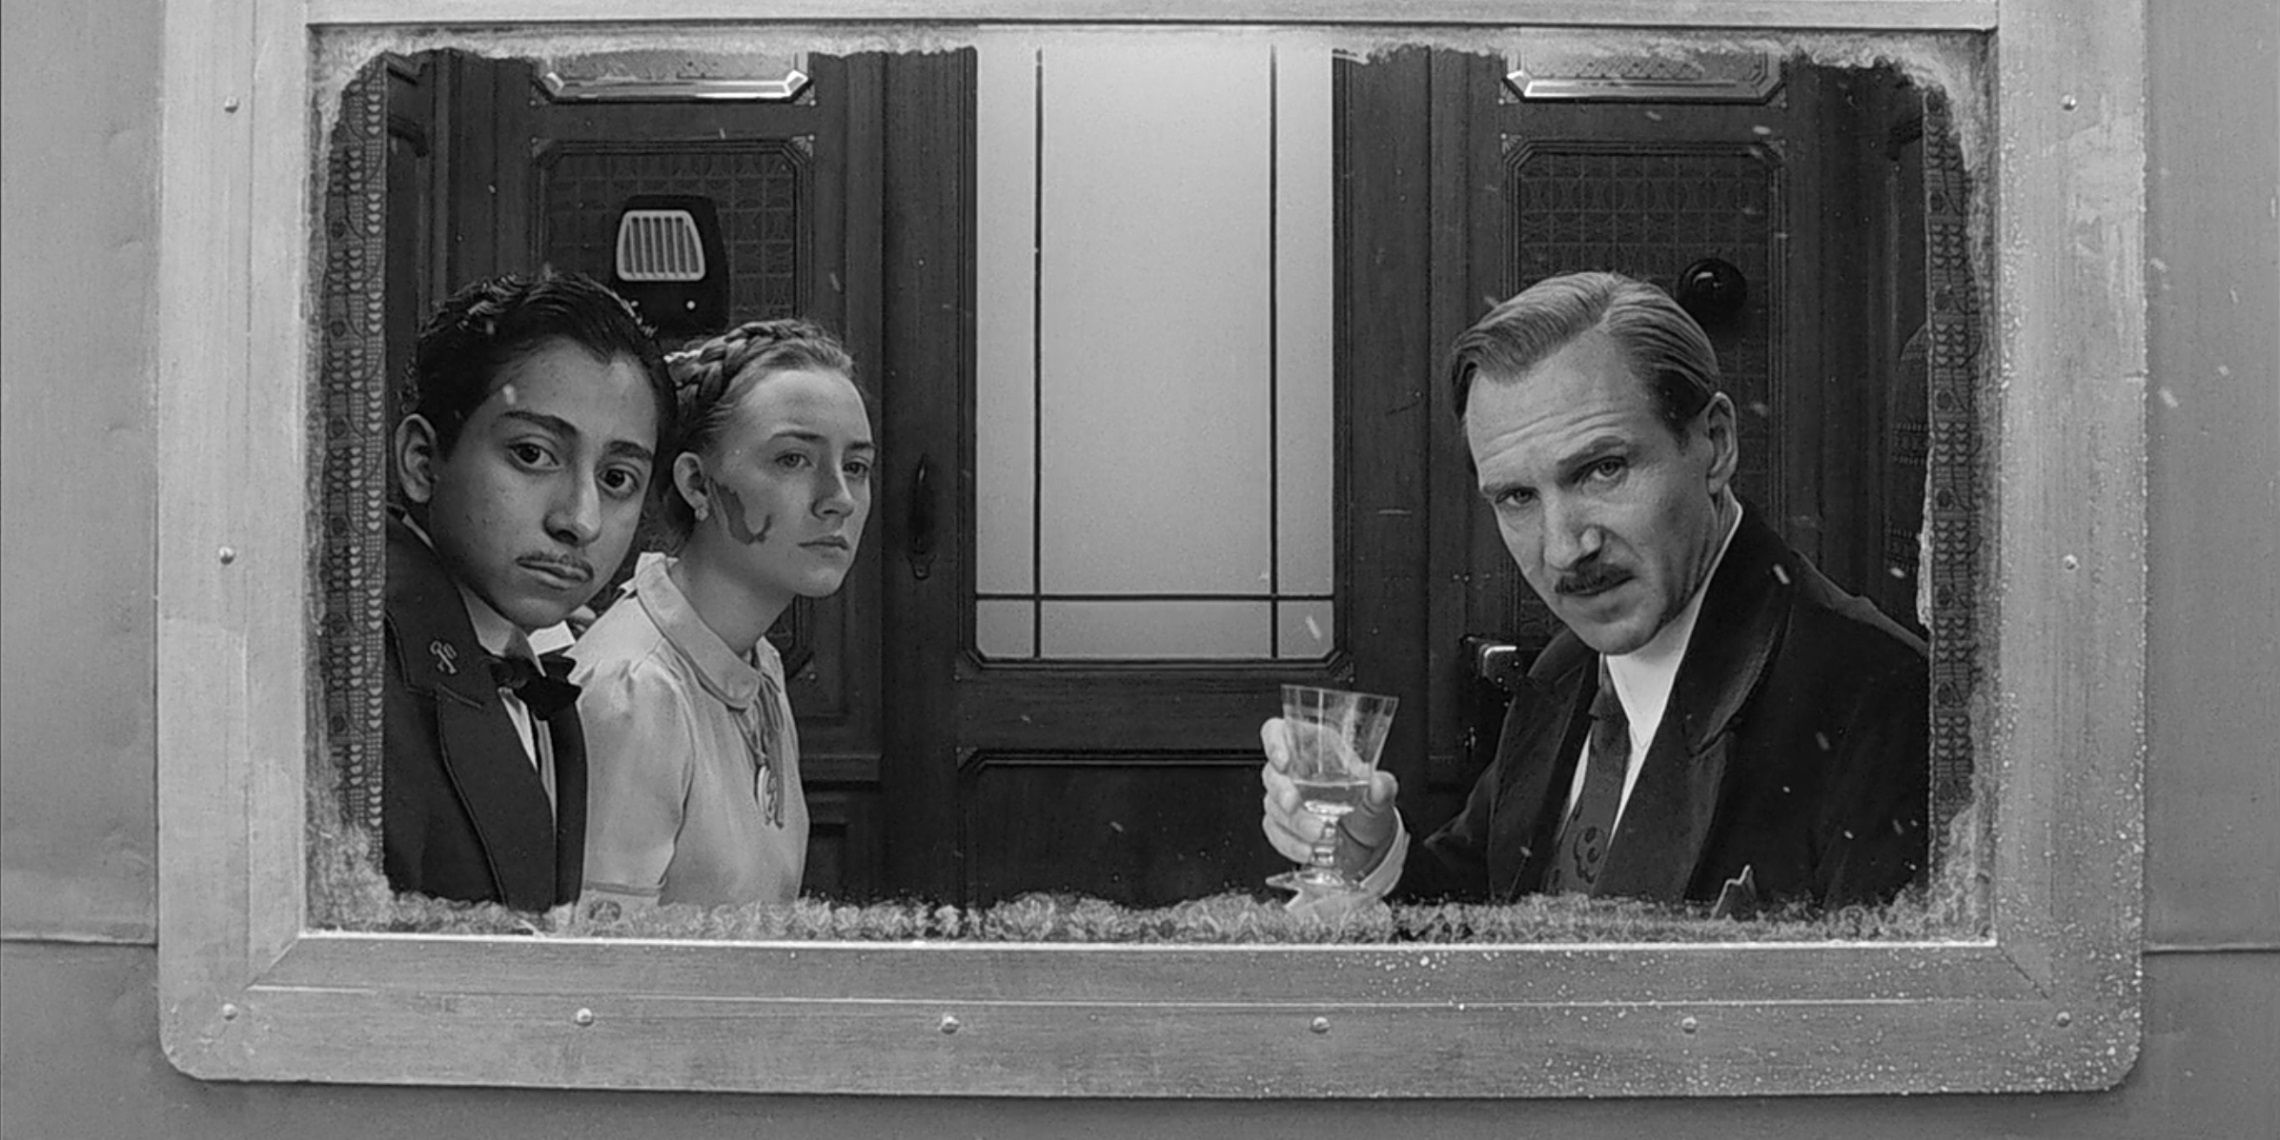 M Gustave, Zero, and Agatha riding a train in The Grand Budapest Hotel